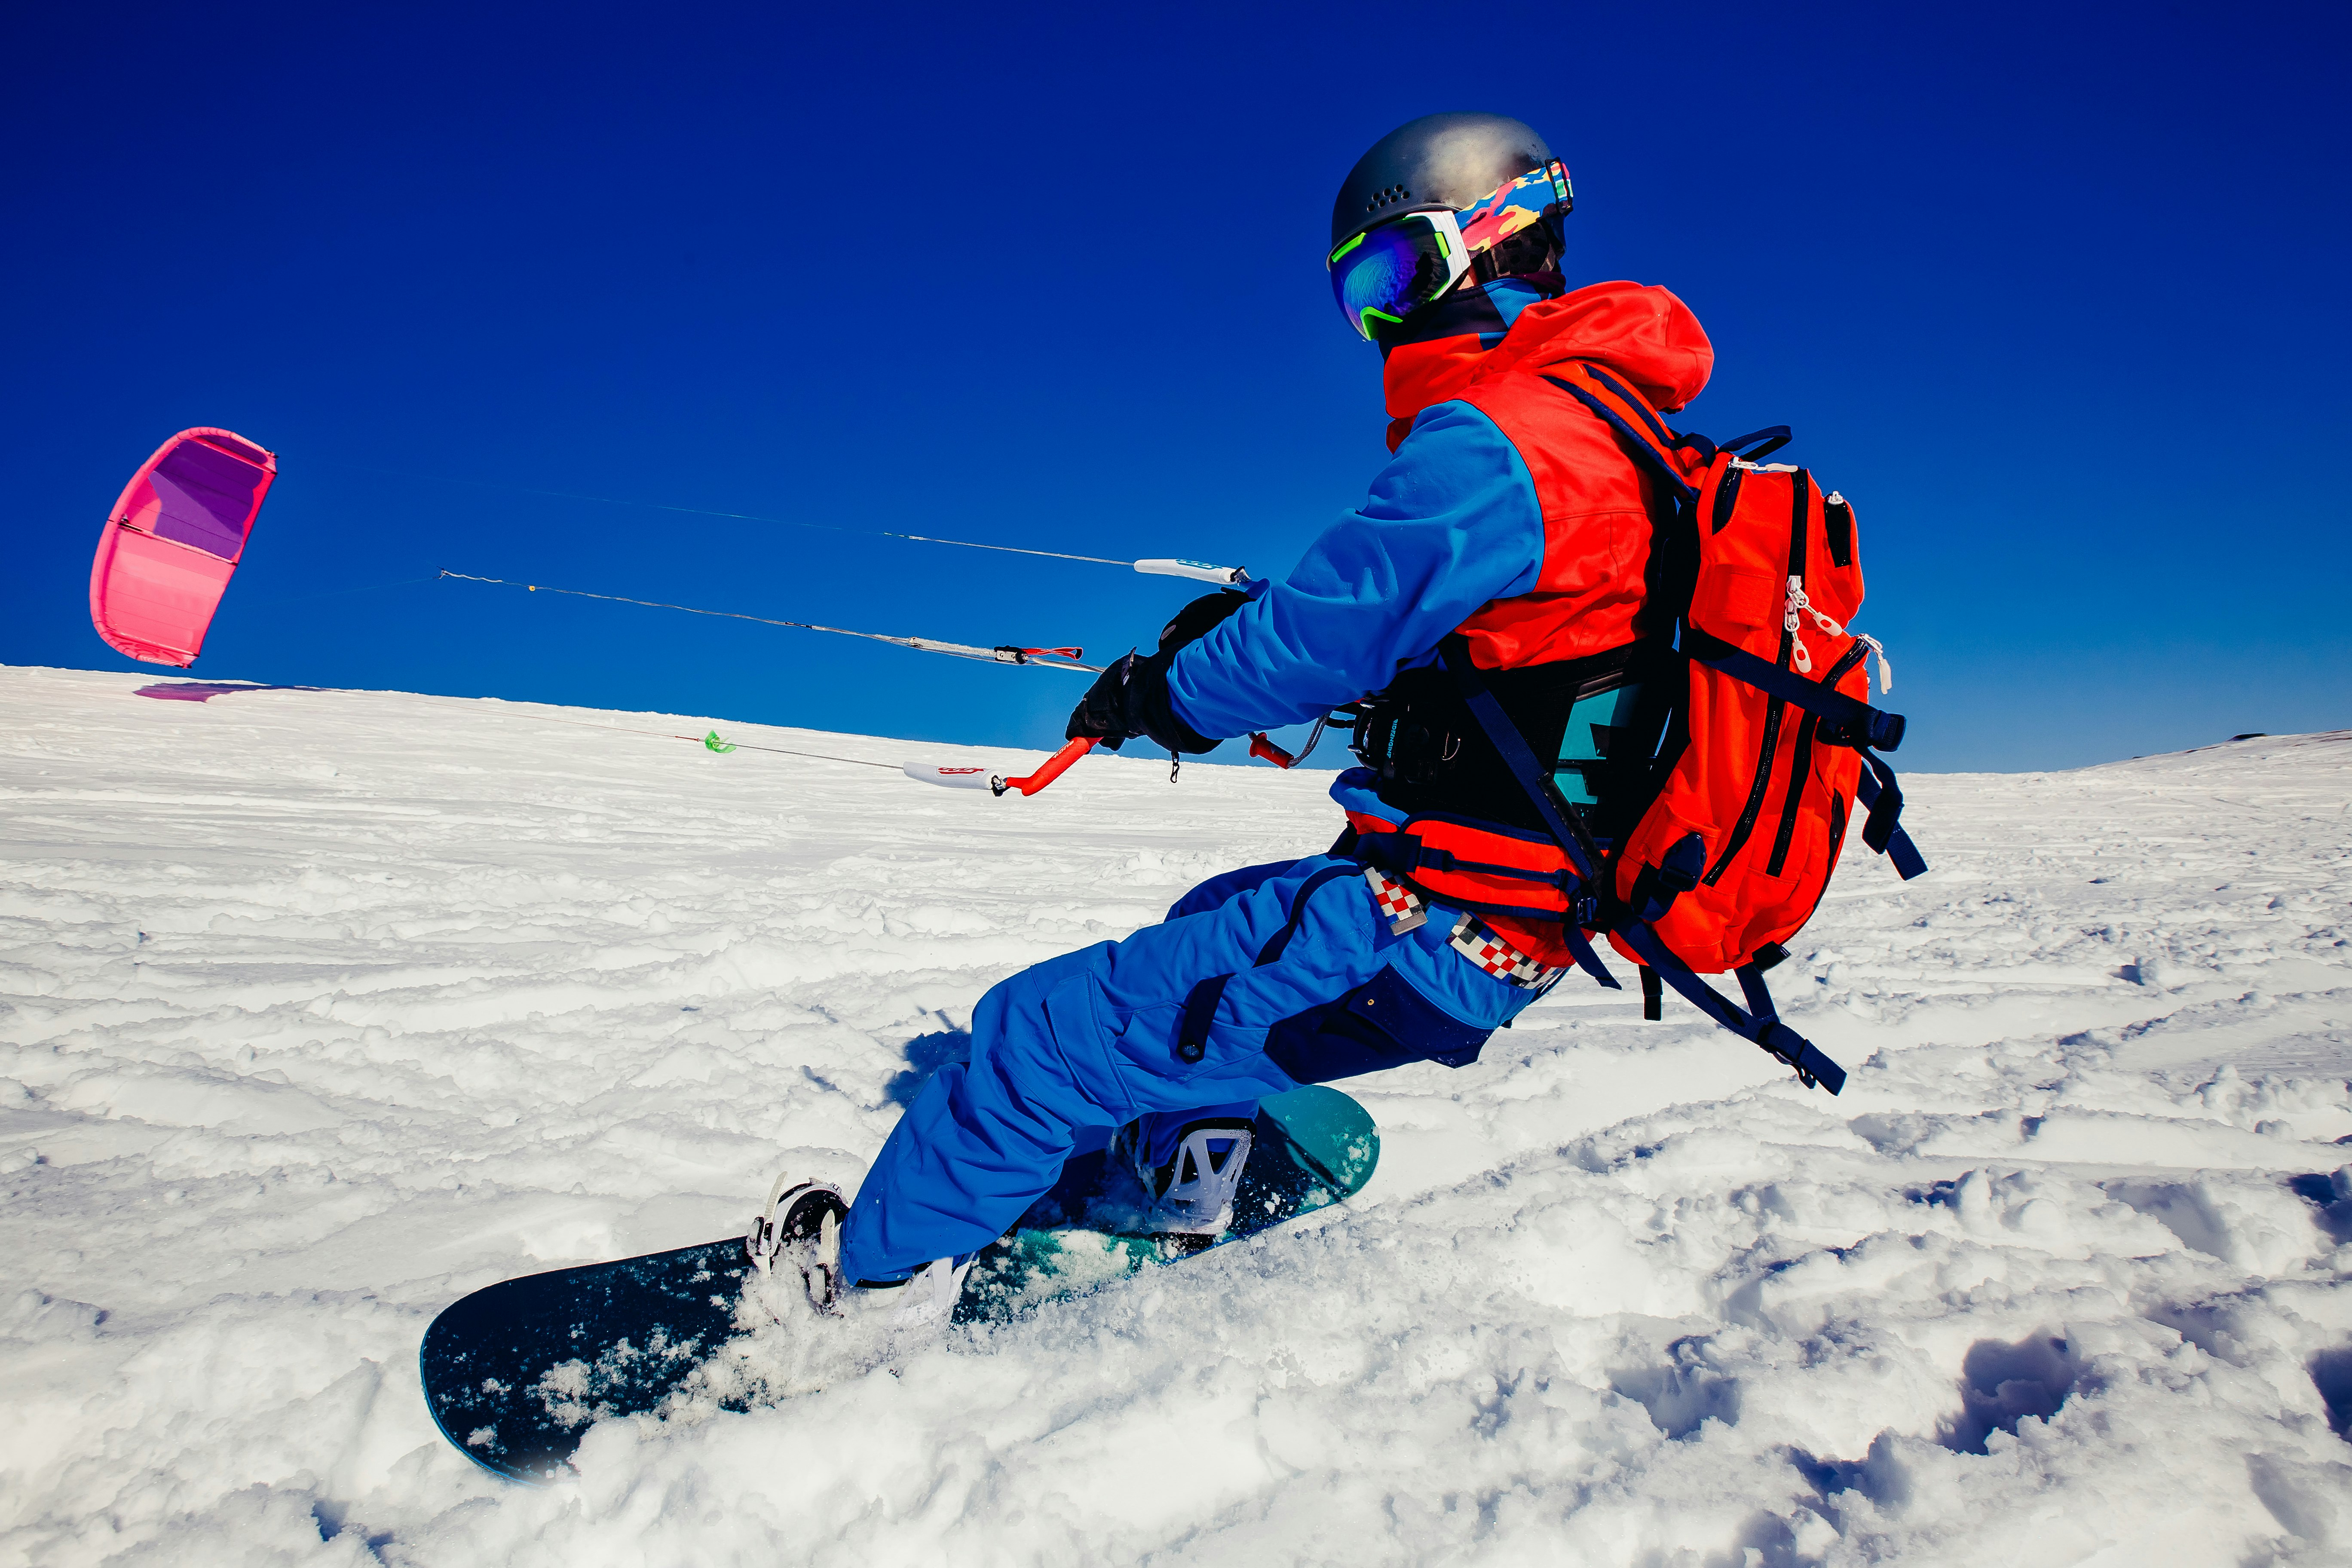 A person on a snowboard and wearing a bright blue and red snow outfit, googles and a helmet holds a handle attached to a large kit over snow